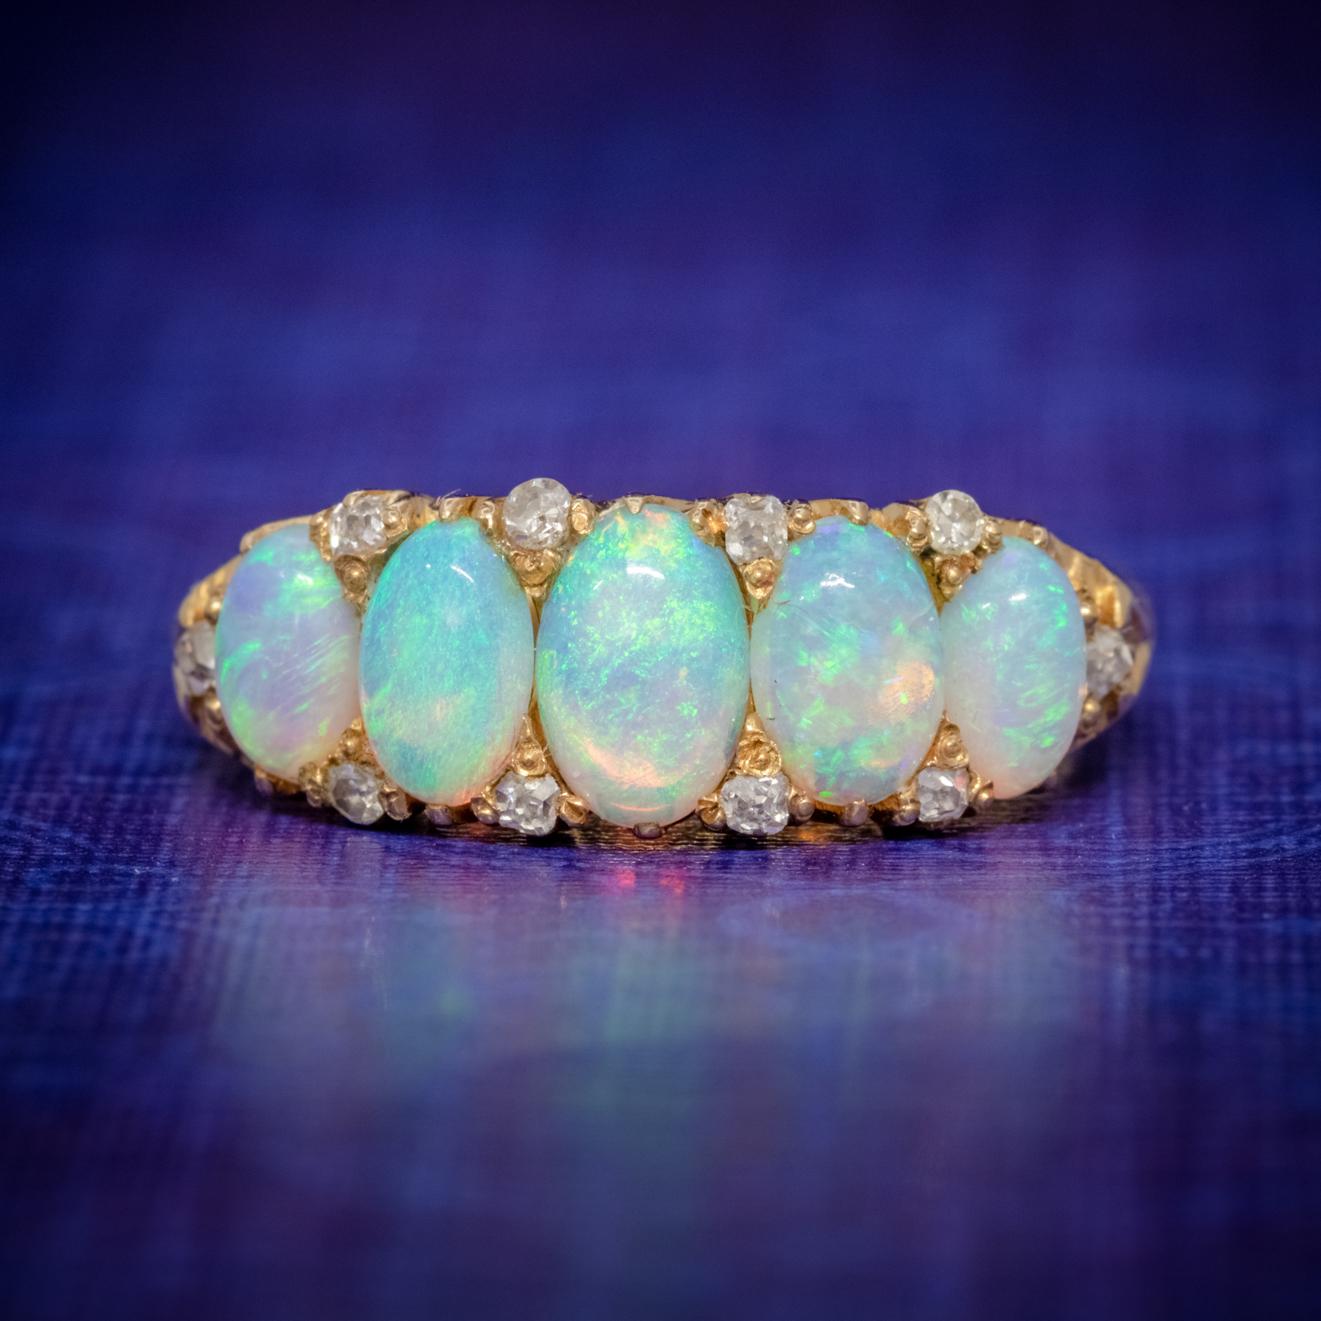 A striking Antique 18ct Gold Opal ring dating from the late-Victorian era Circa 1880. The piece is adorned with five fabulous natural Opals accompanied by ten twinkling Diamonds nestled in-between.   

The Opals are a kaleidoscope of vibrant colours